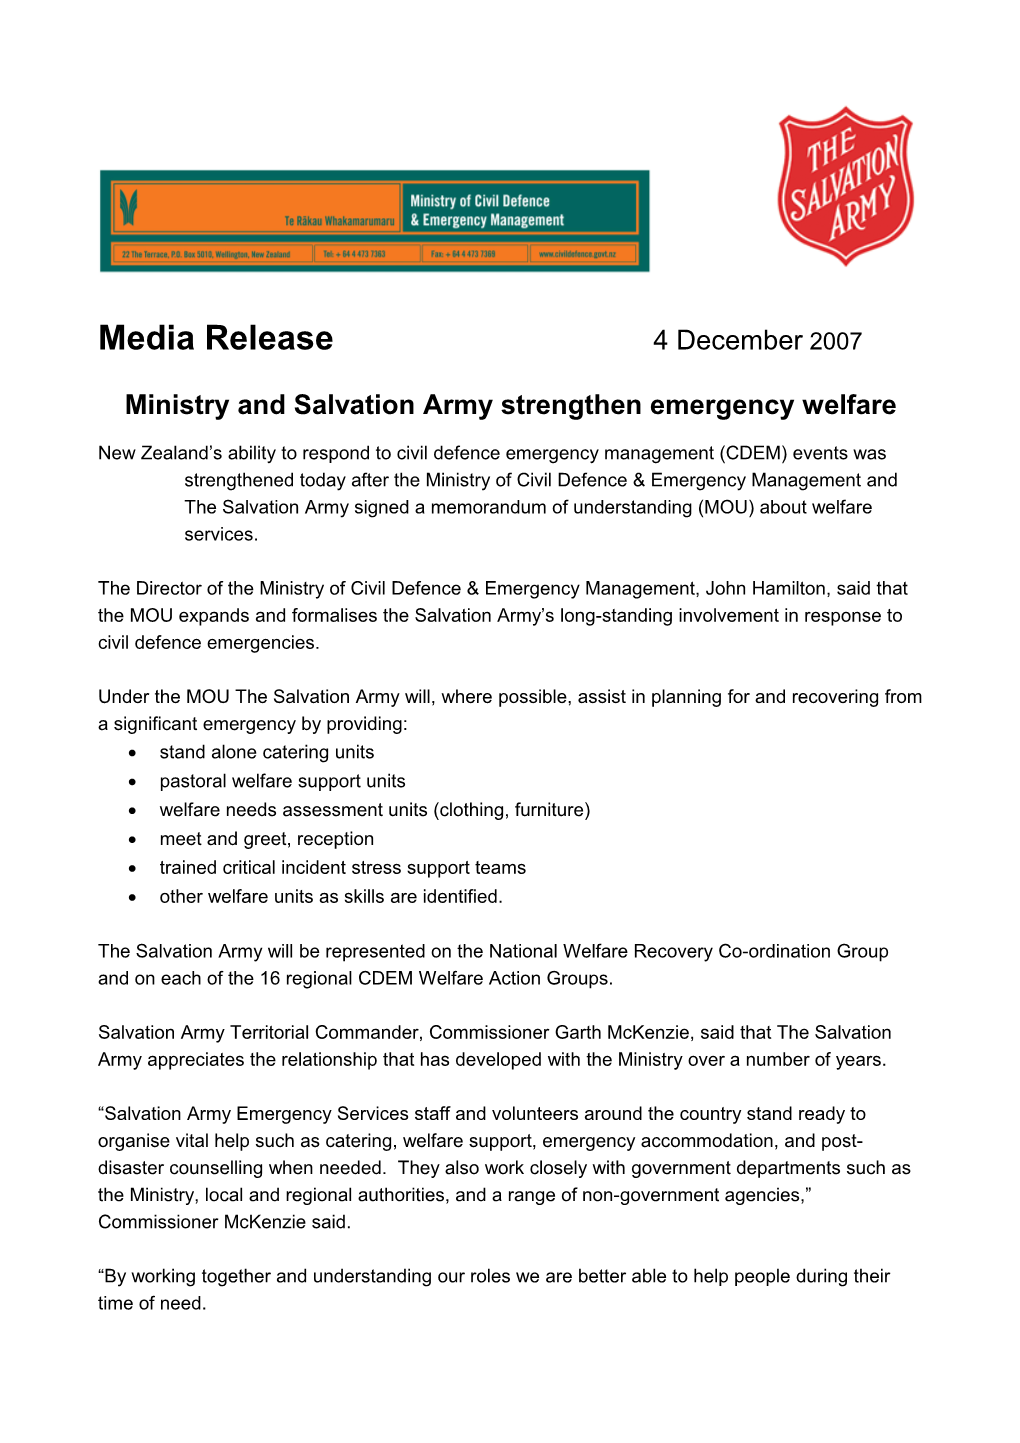 Ministry and Salvation Army Strengthen Emergency Welfare